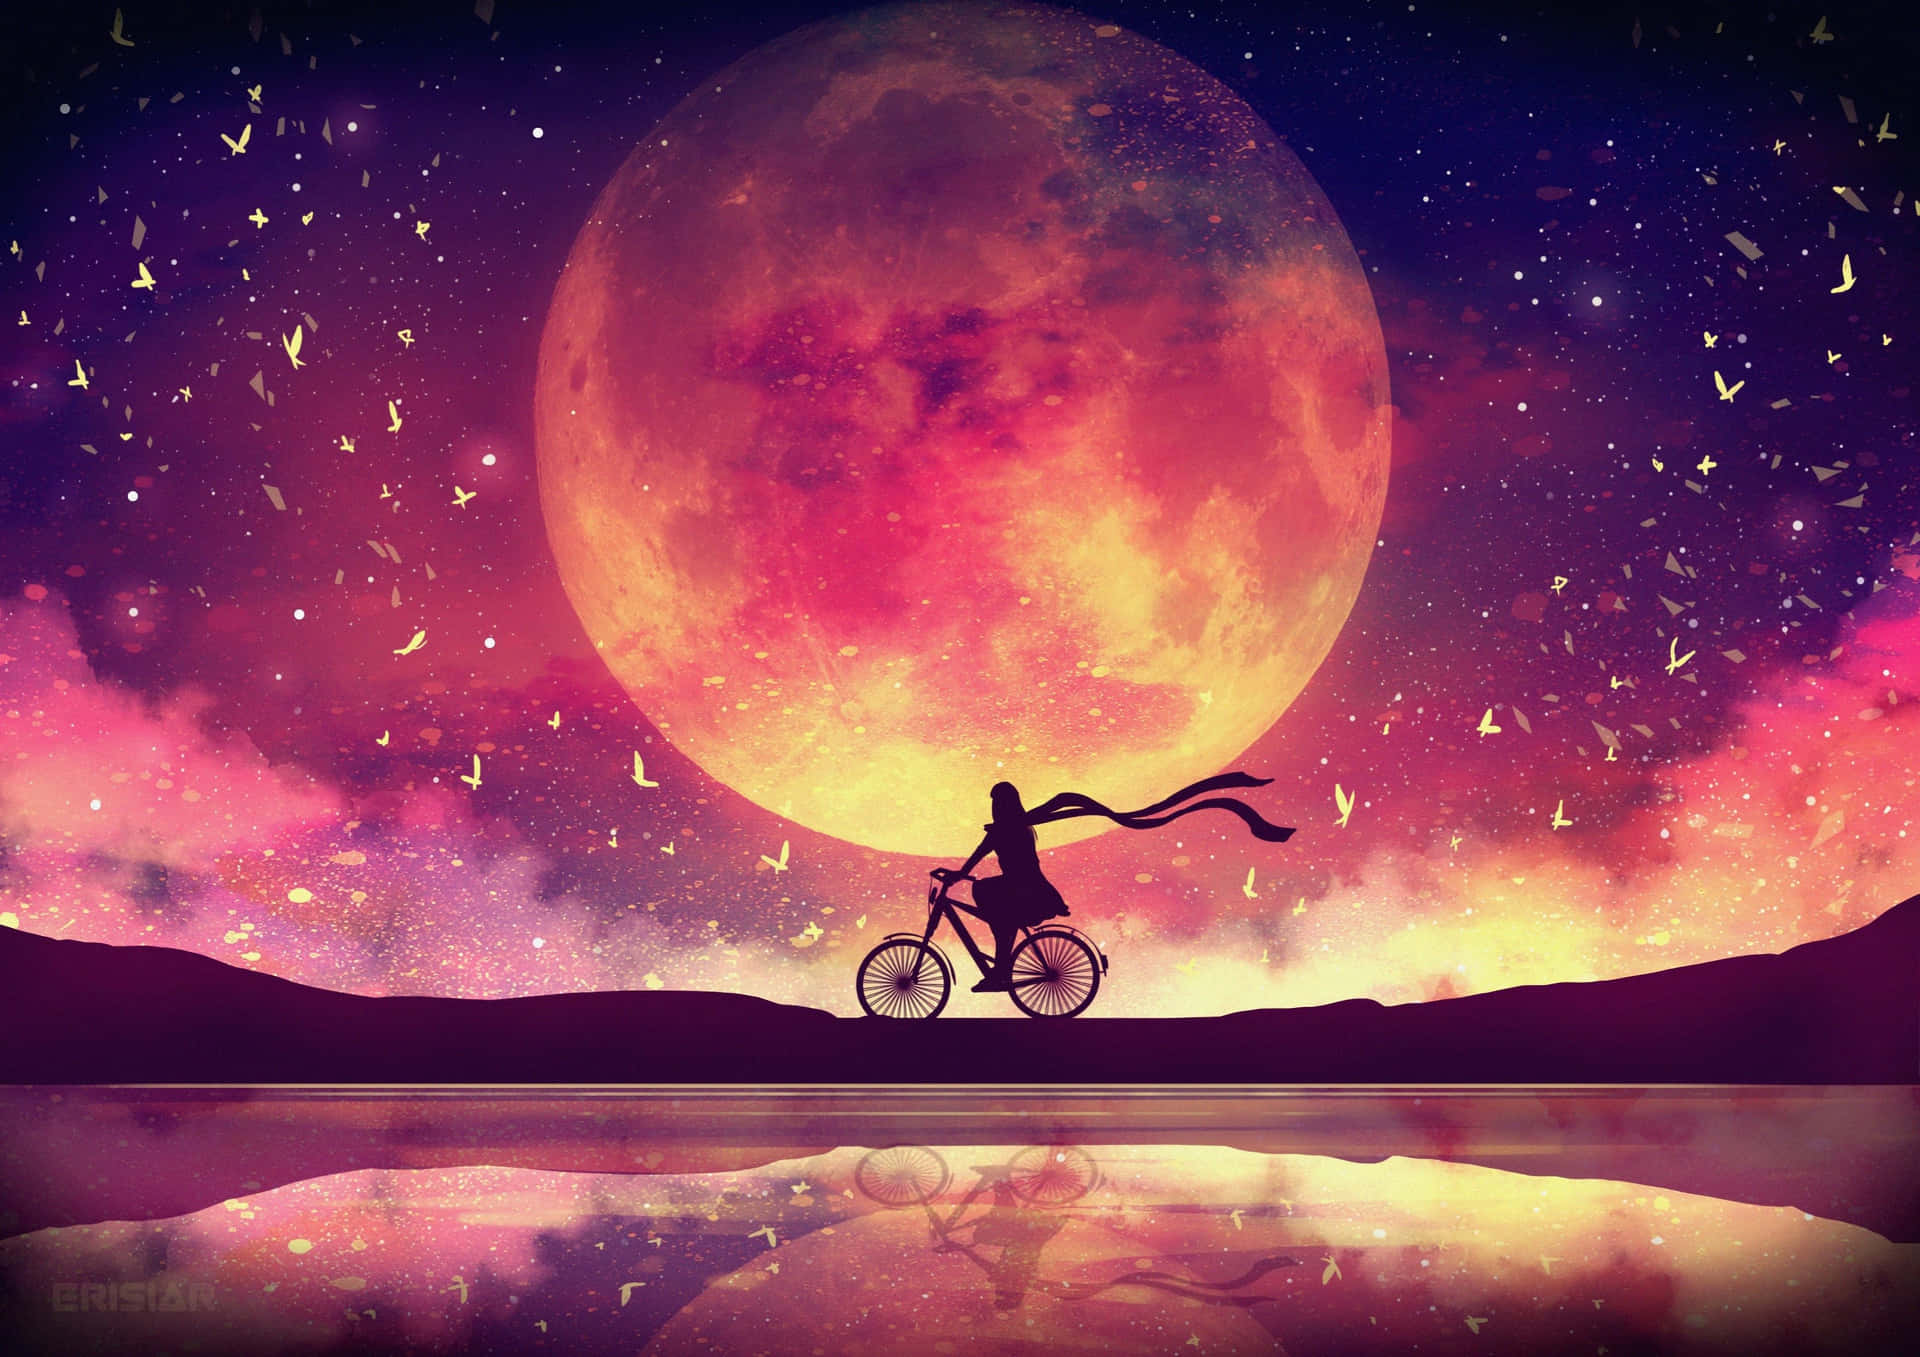 A Woman Riding A Bicycle In Front Of A Full Moon